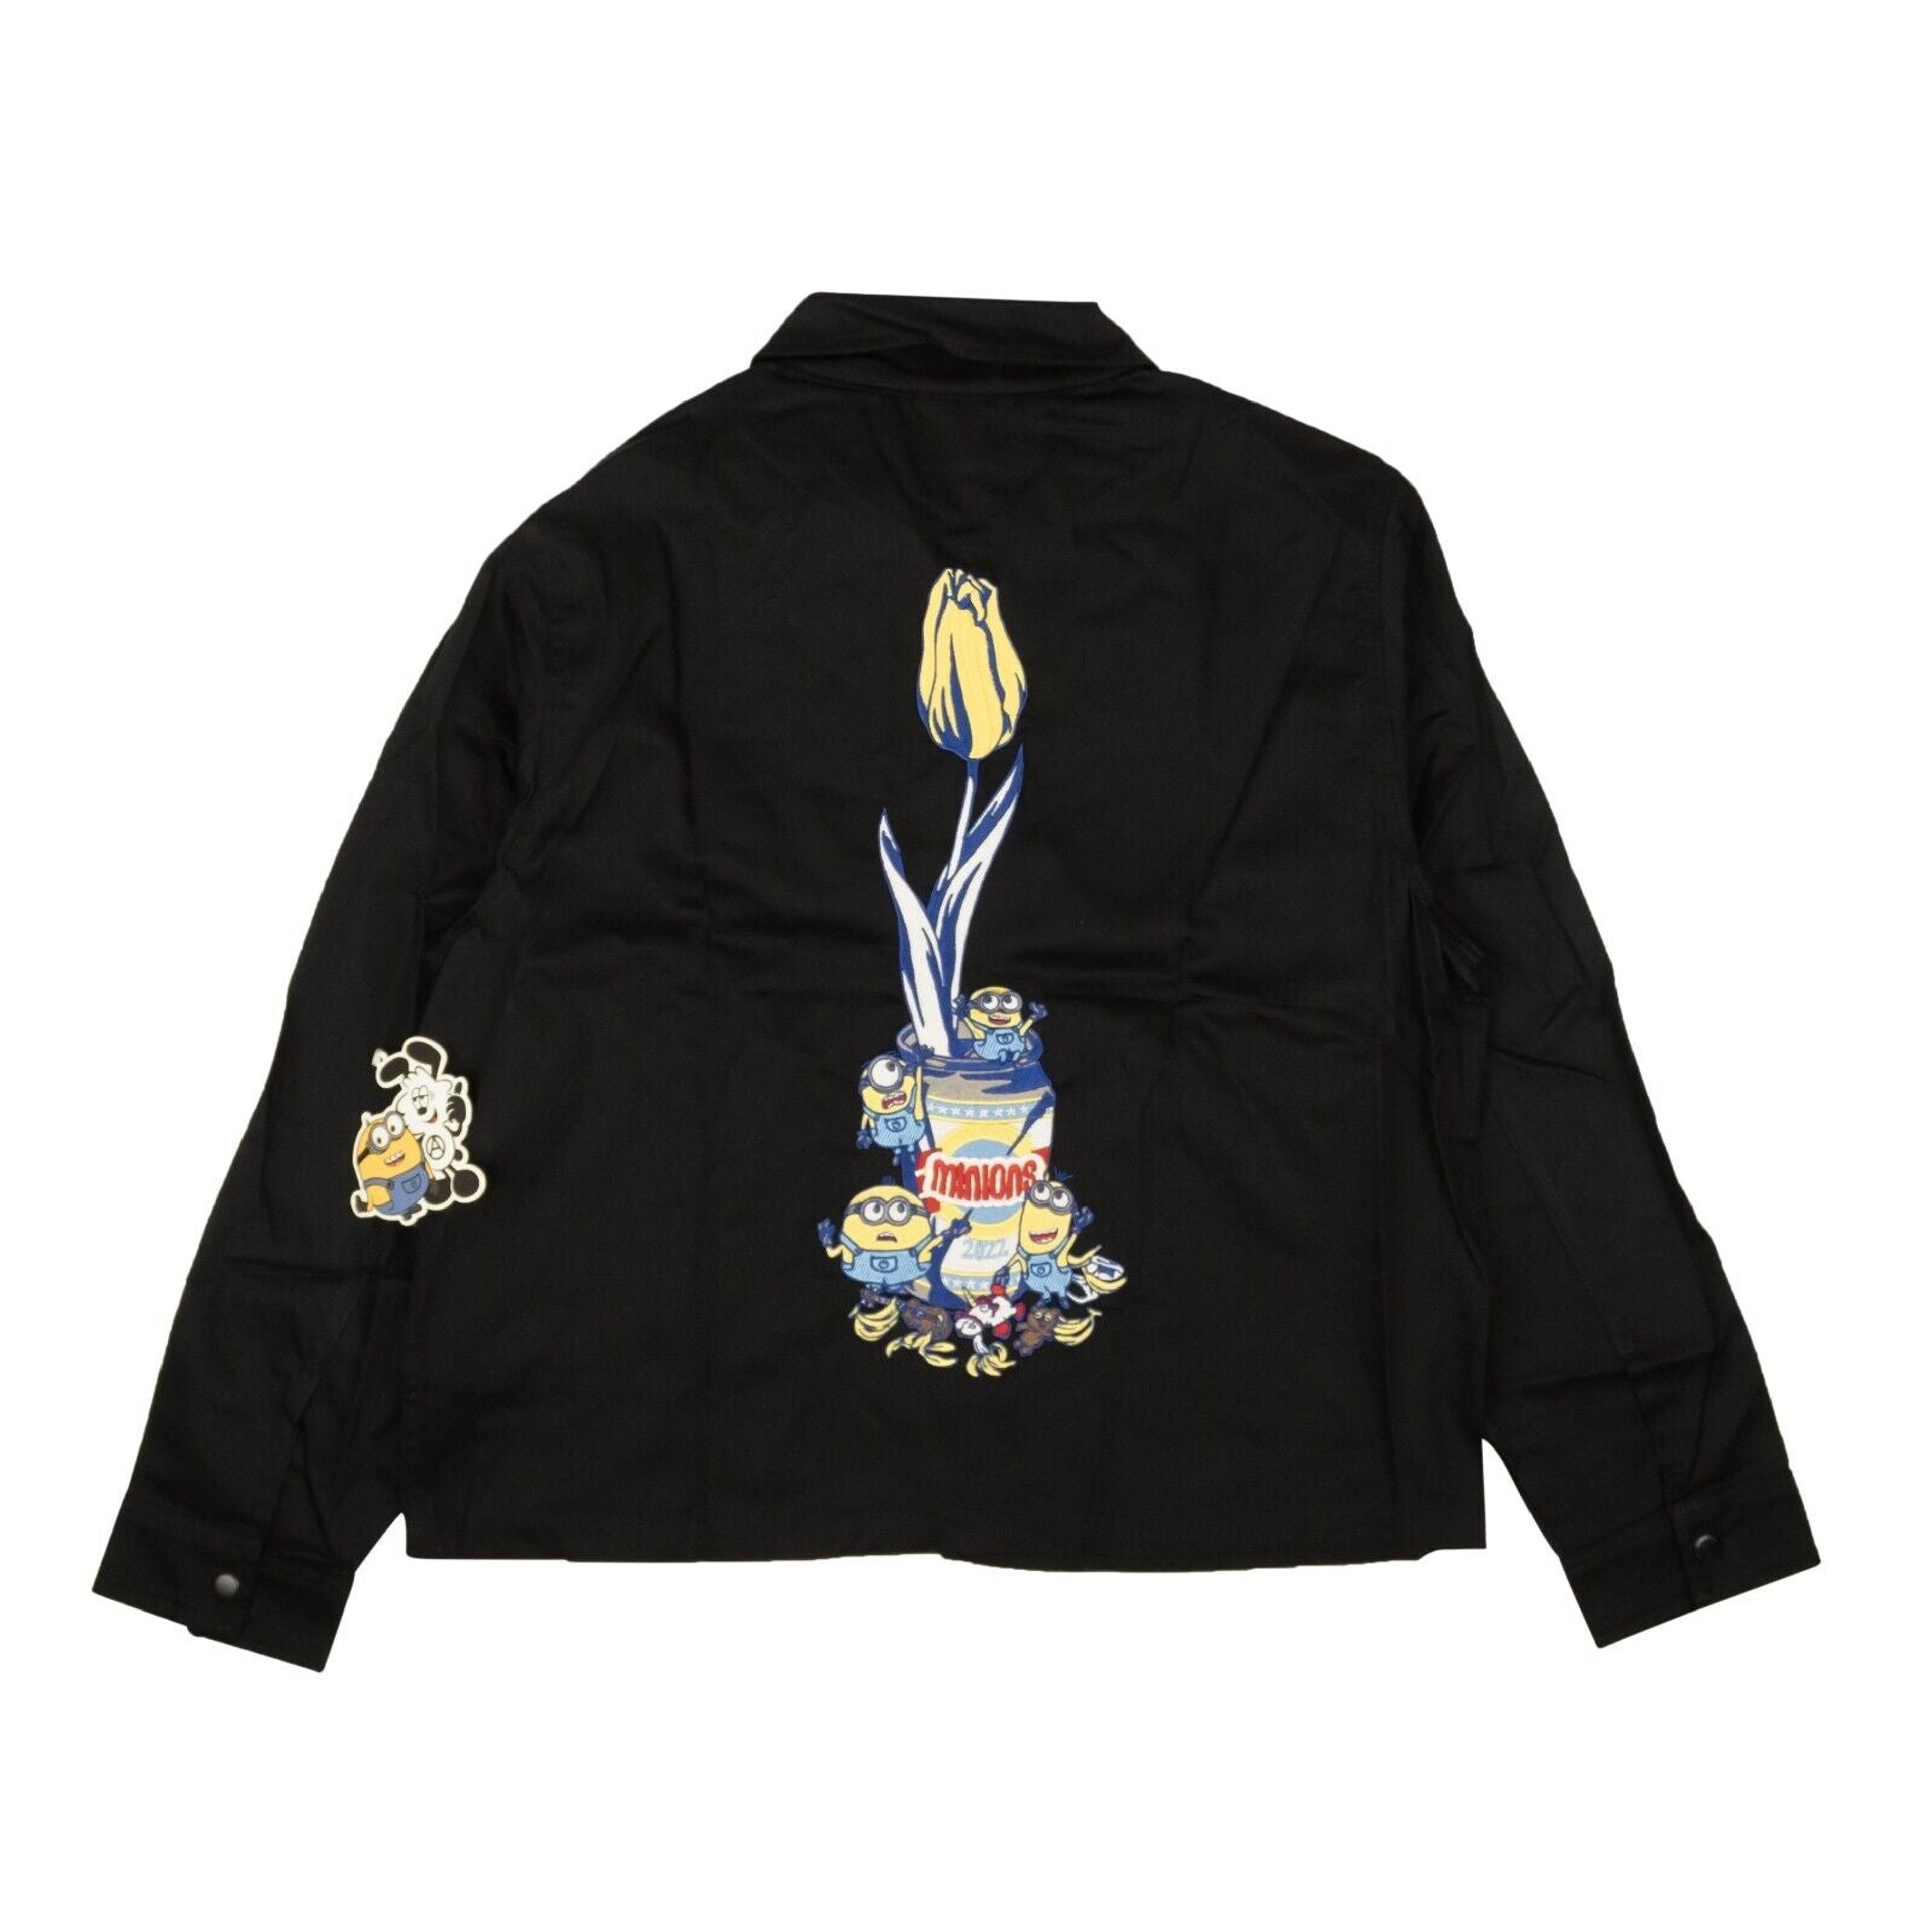 Alternate View 3 of Complexcon Wasted Youth Minions X Jacket - Black